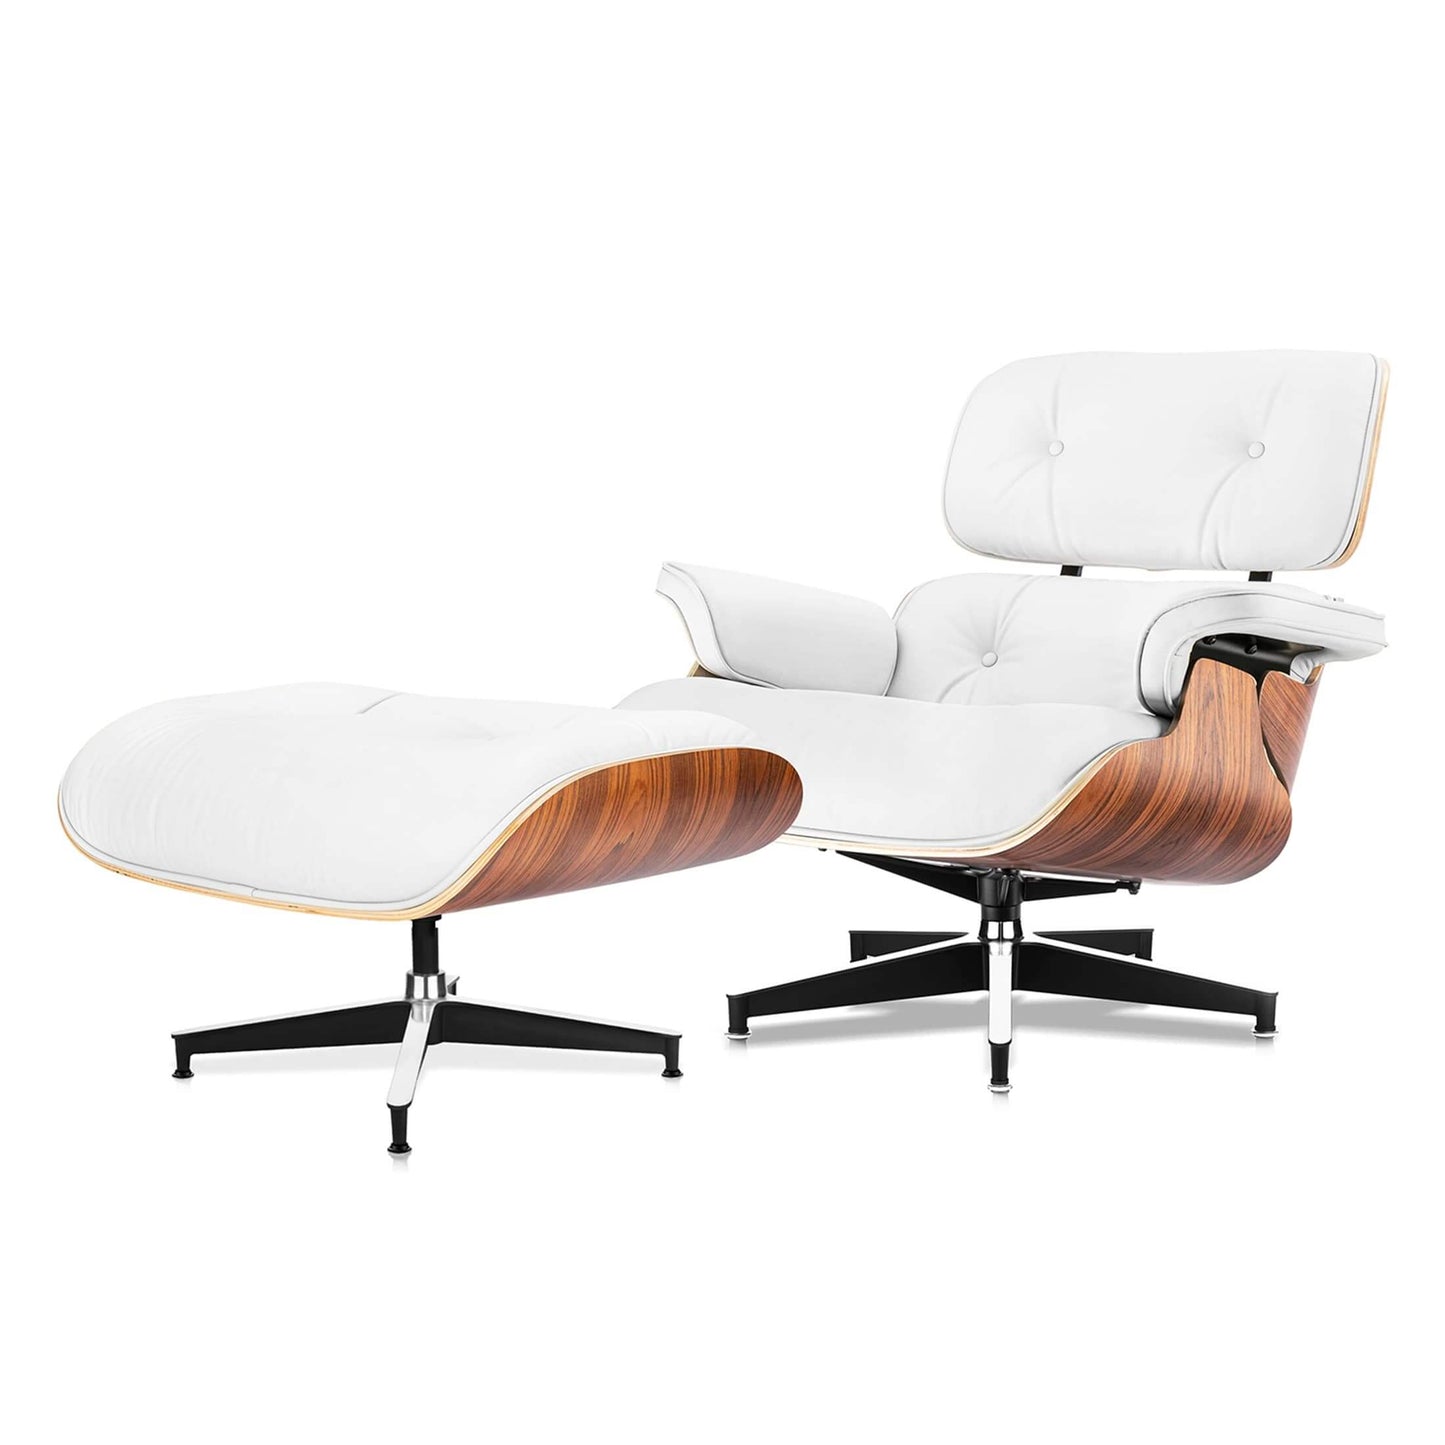 Arthia Designs - Eames Mid-Century American Lounge Chair and Ottoman (Tall Version) - Review